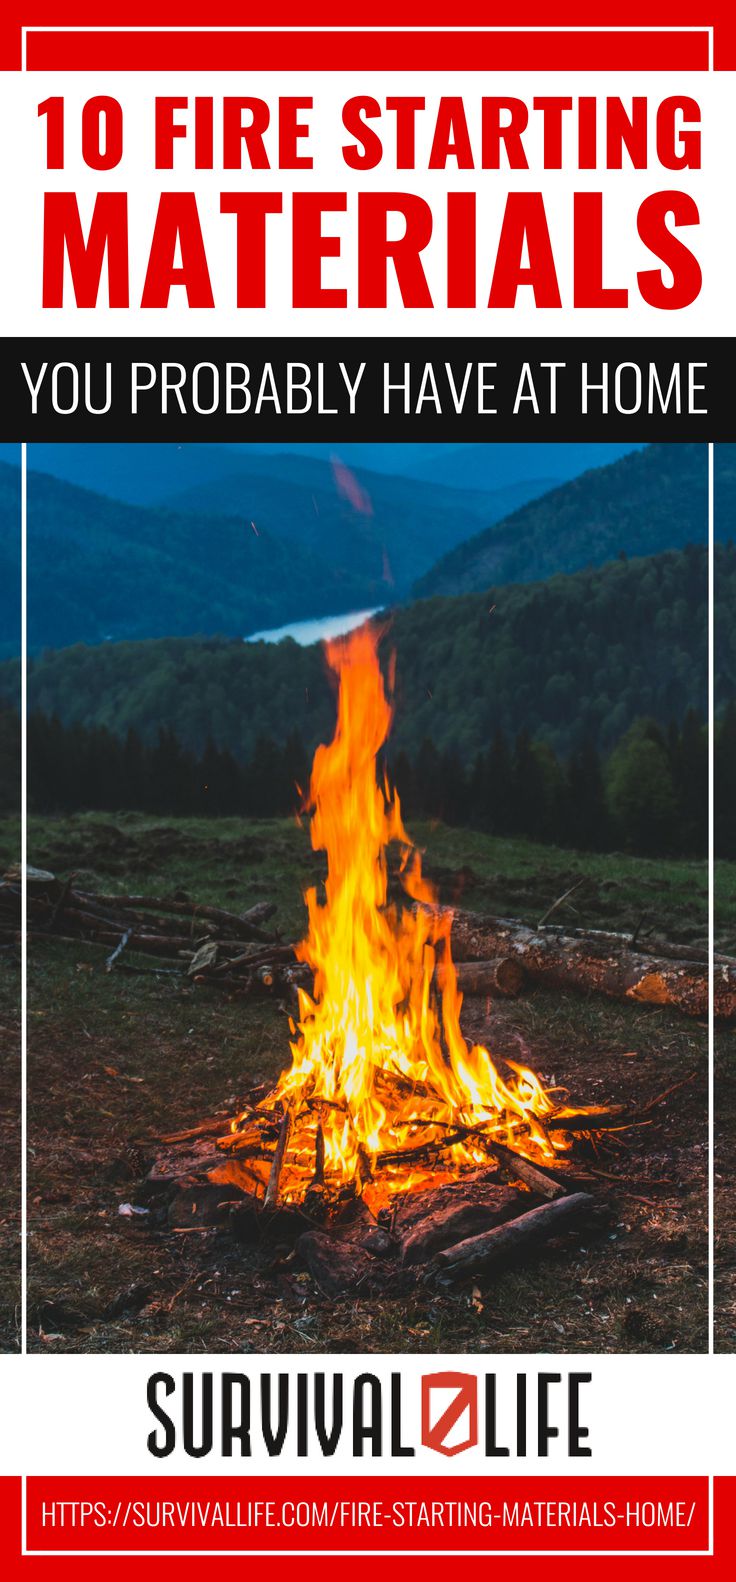 Fire Starting Materials You Probably Have At Home | https://survivallife.com/fire-starting-materials-home/